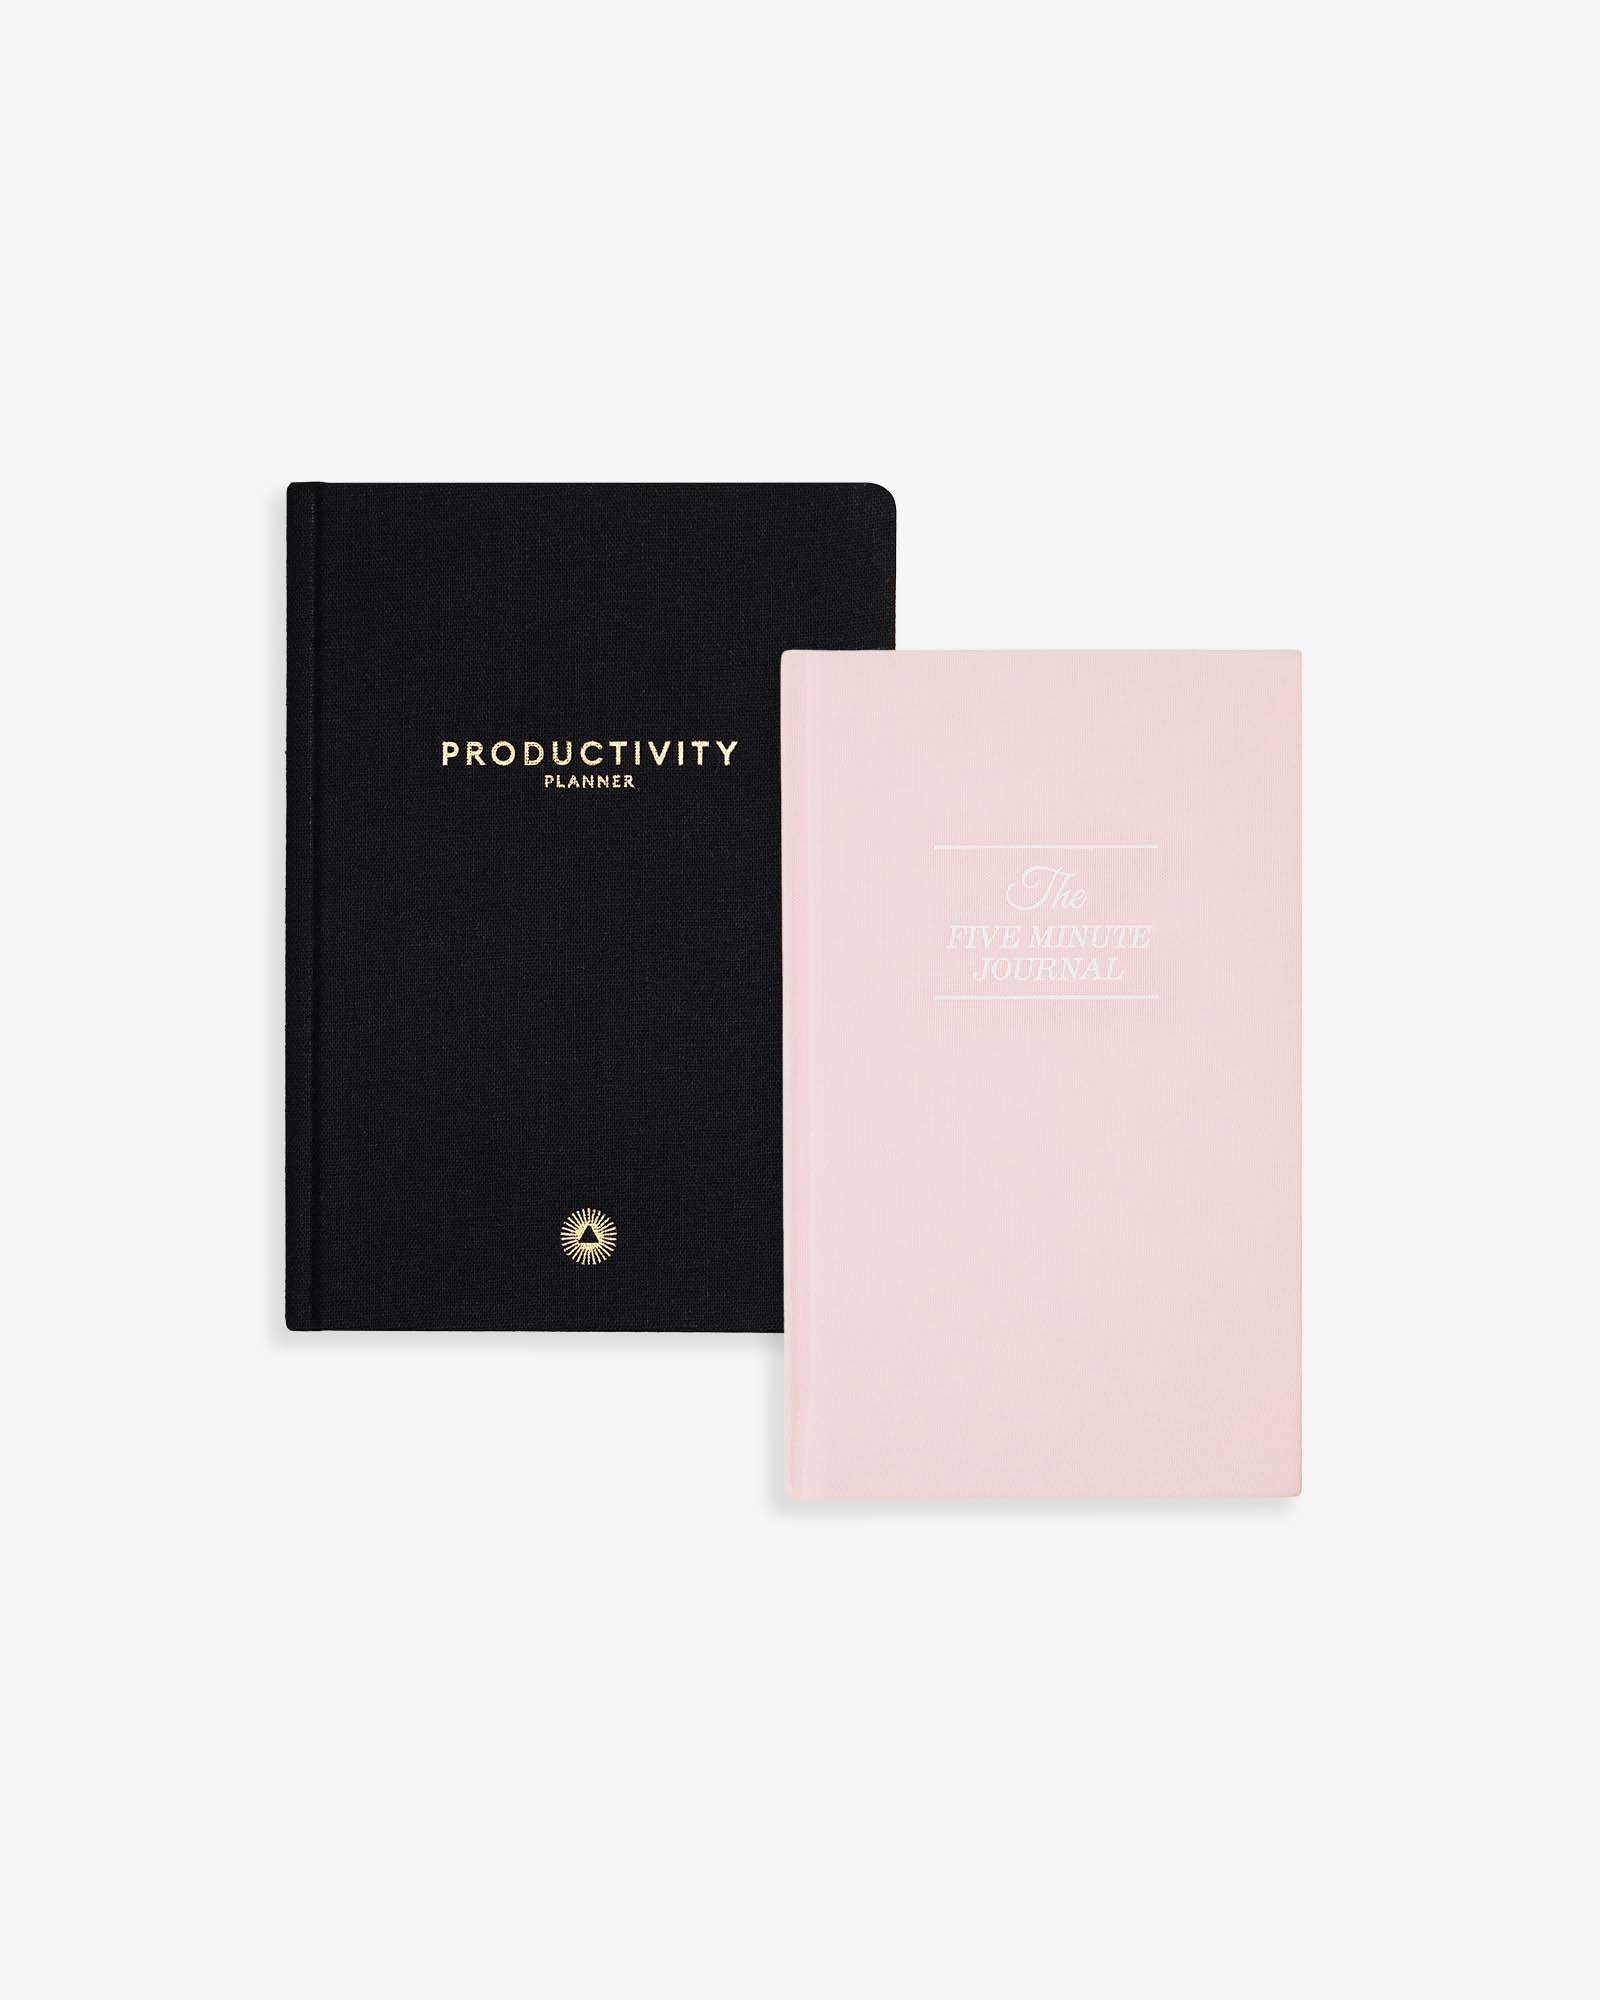 Duo Bundle: The Five Minute Journal and Productivity Planner - Blush Pink